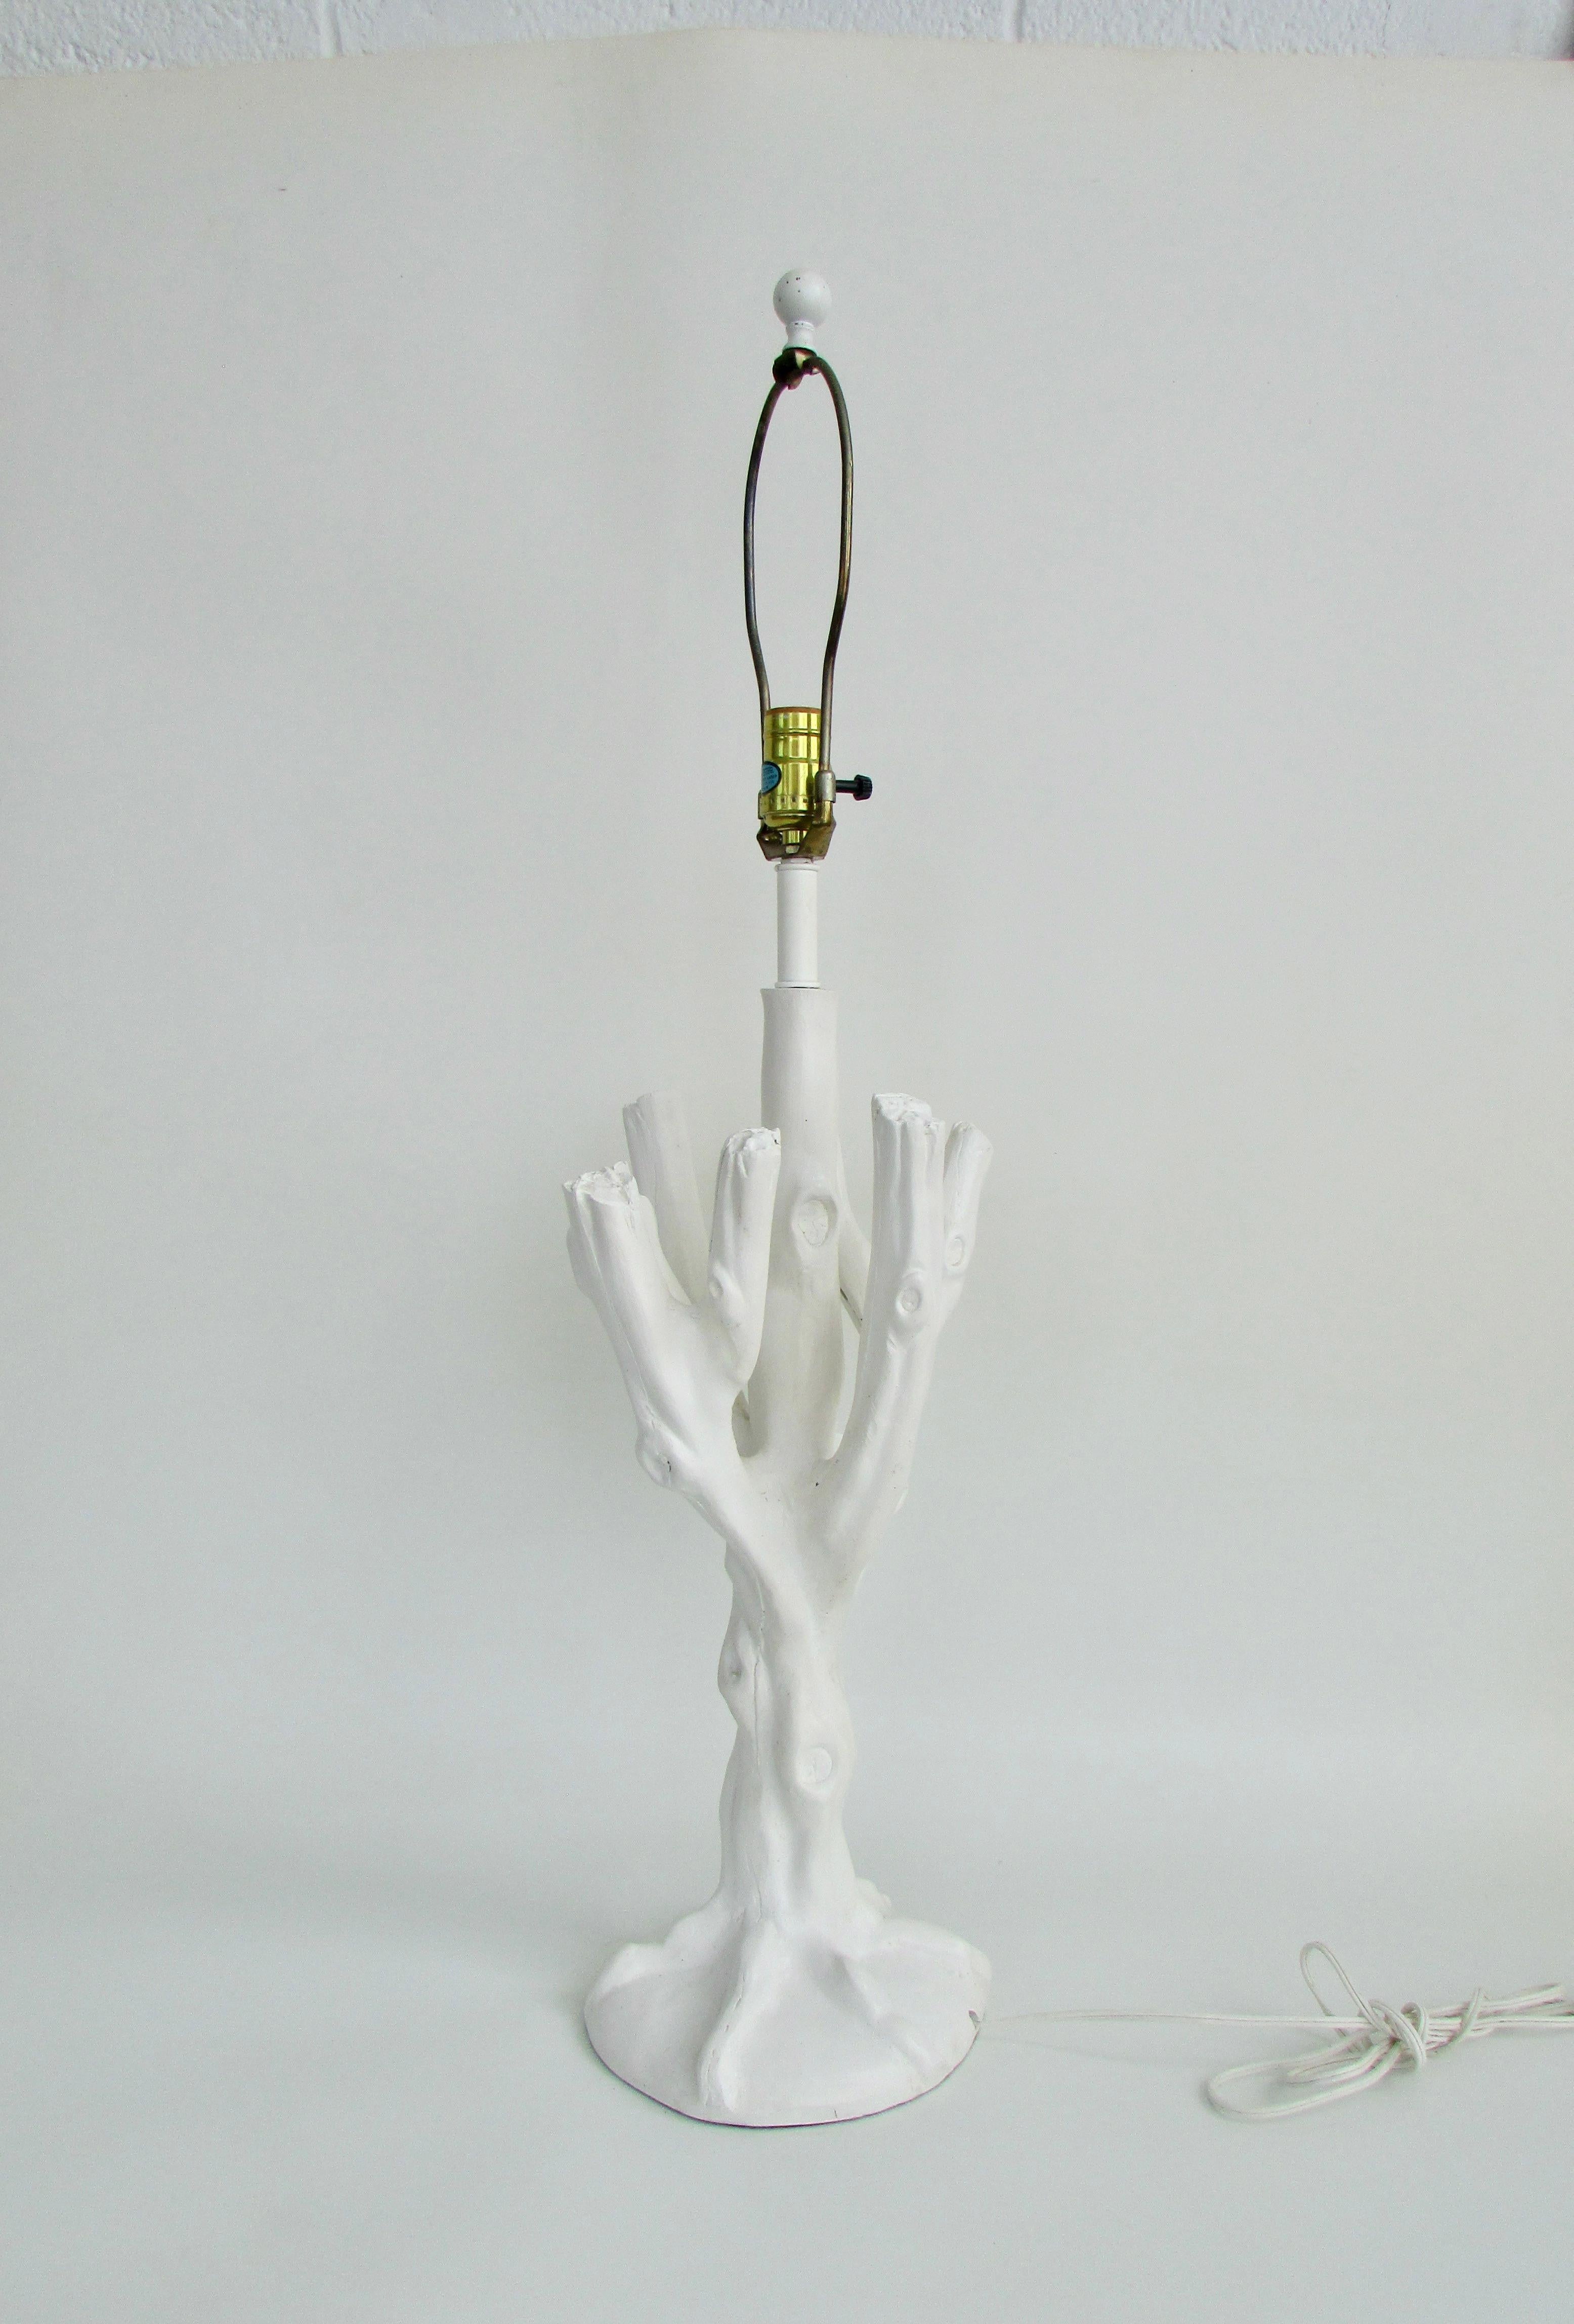 John Dickinson style organic tree branch table lamp in white finish In Good Condition For Sale In Ferndale, MI